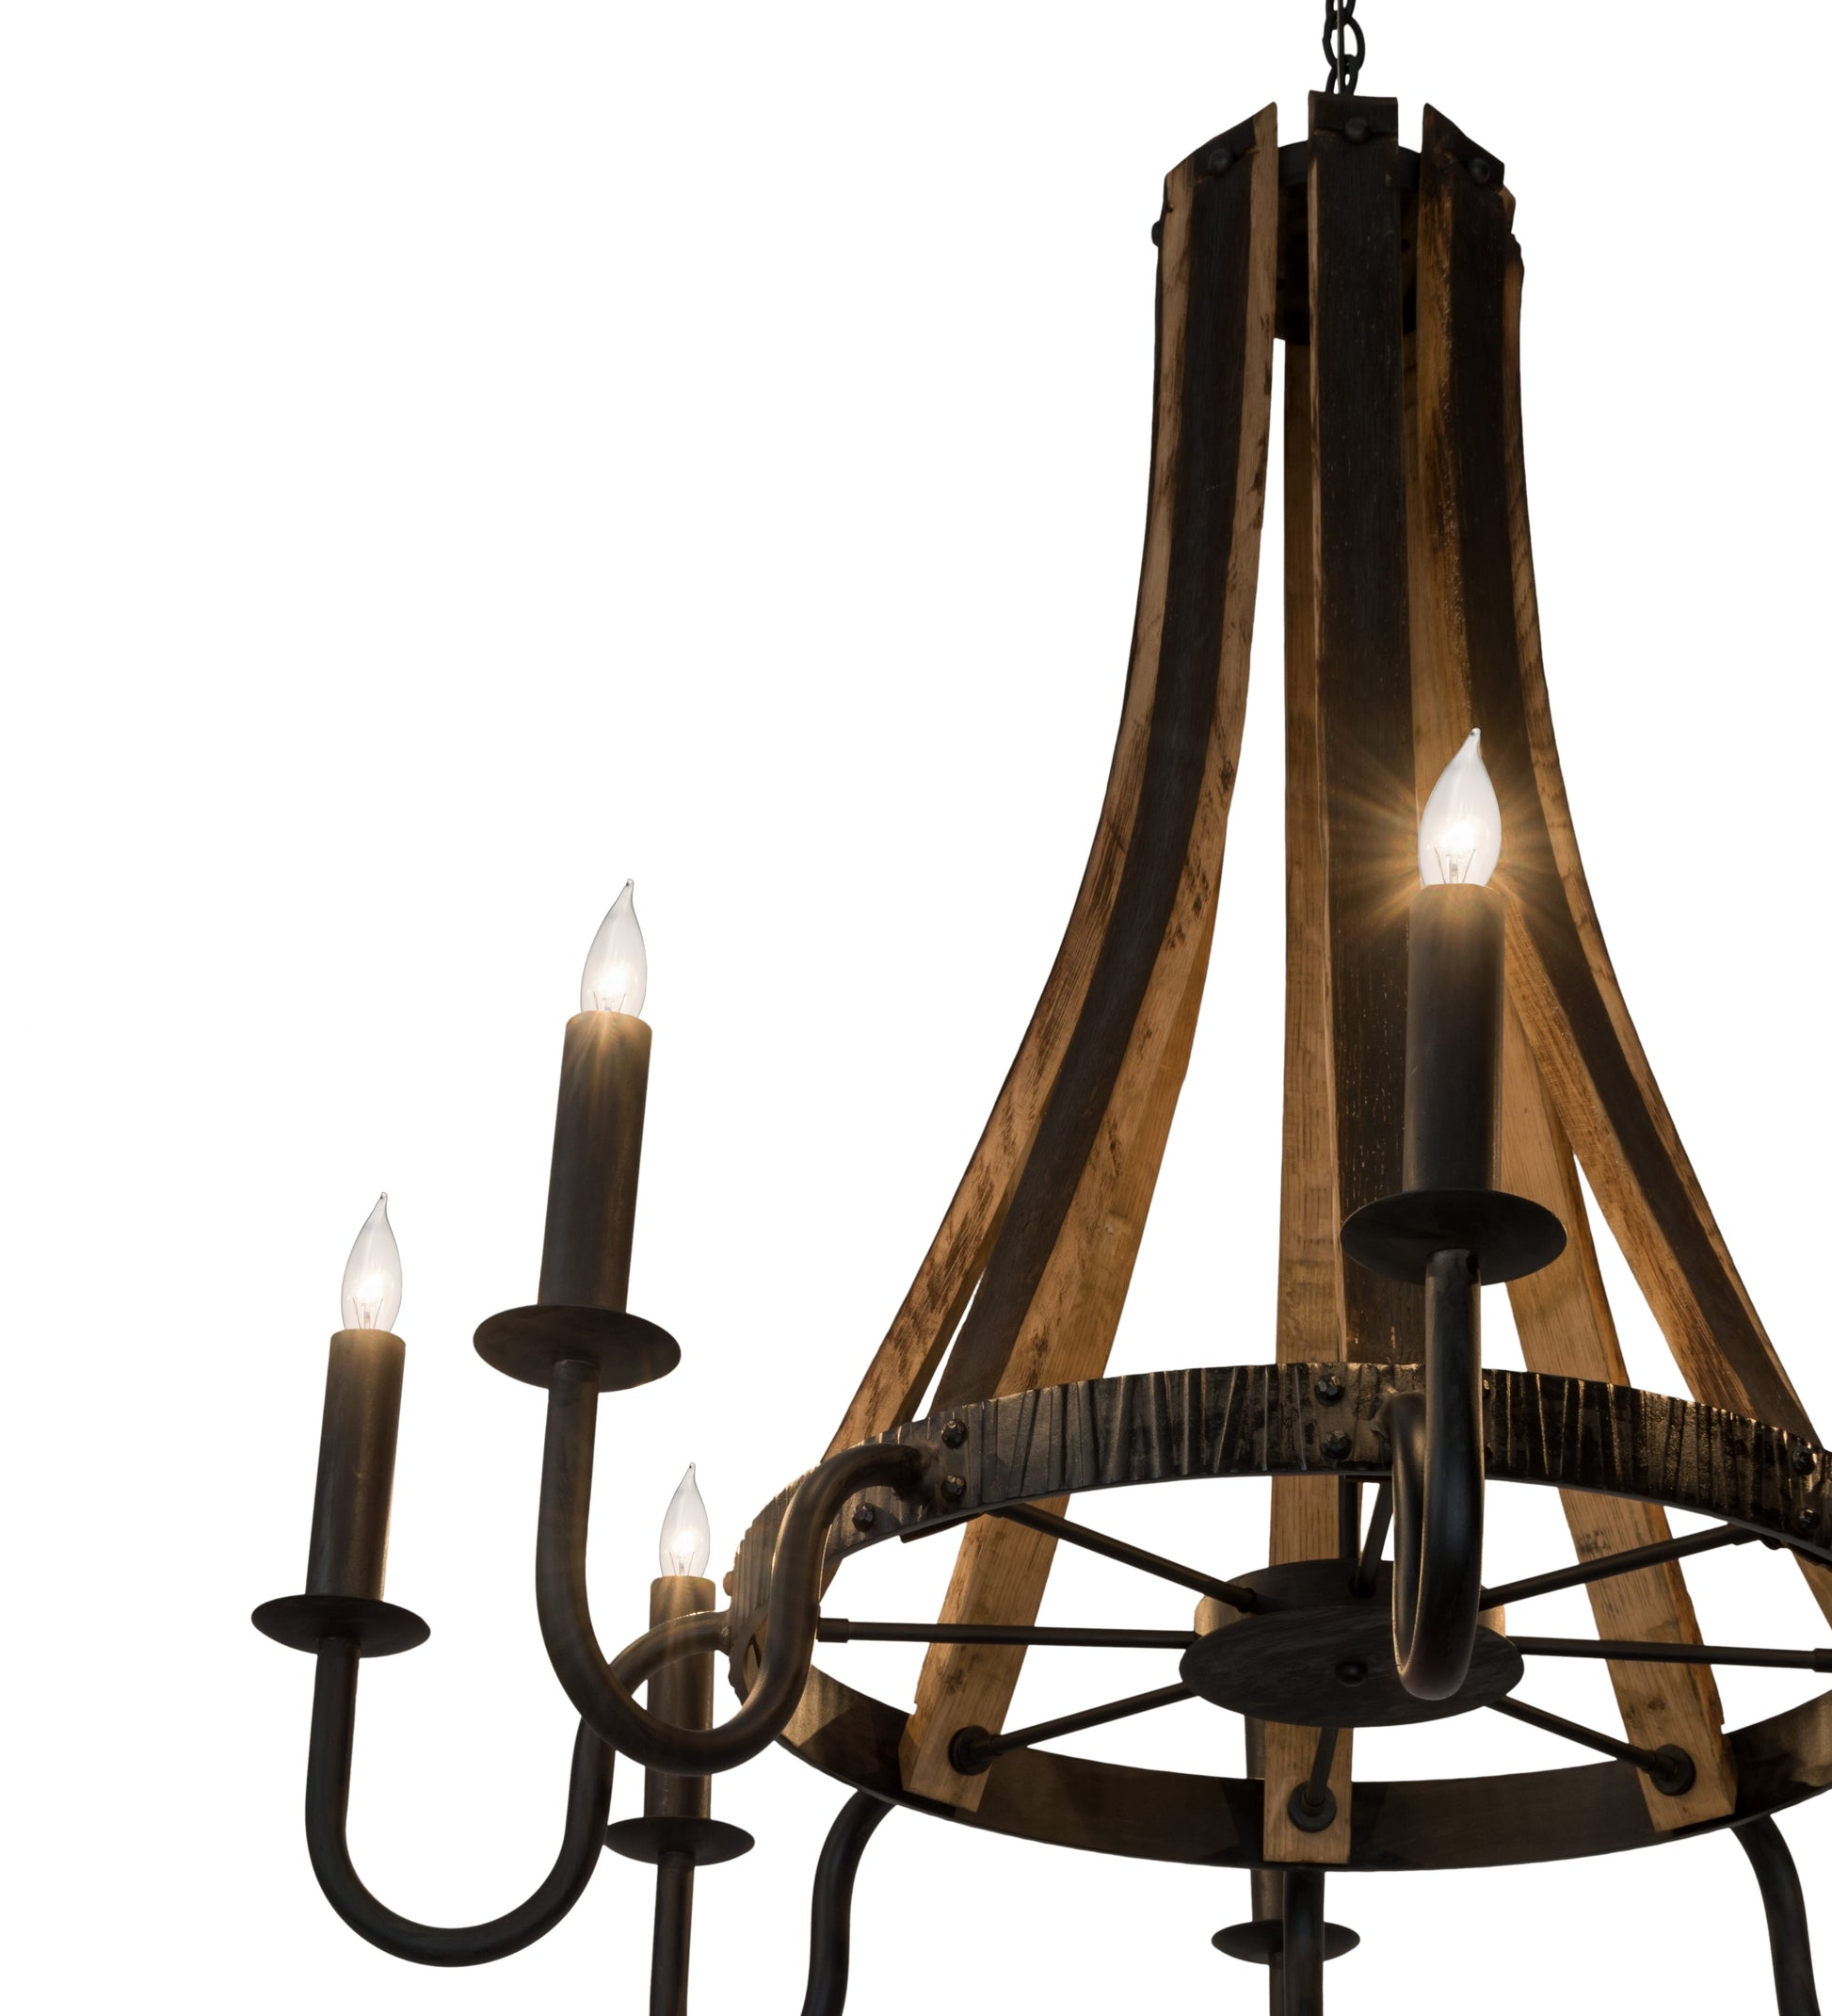 43" Barrel Stave Madera 8-Light Chandelier by 2nd Ave Lighting